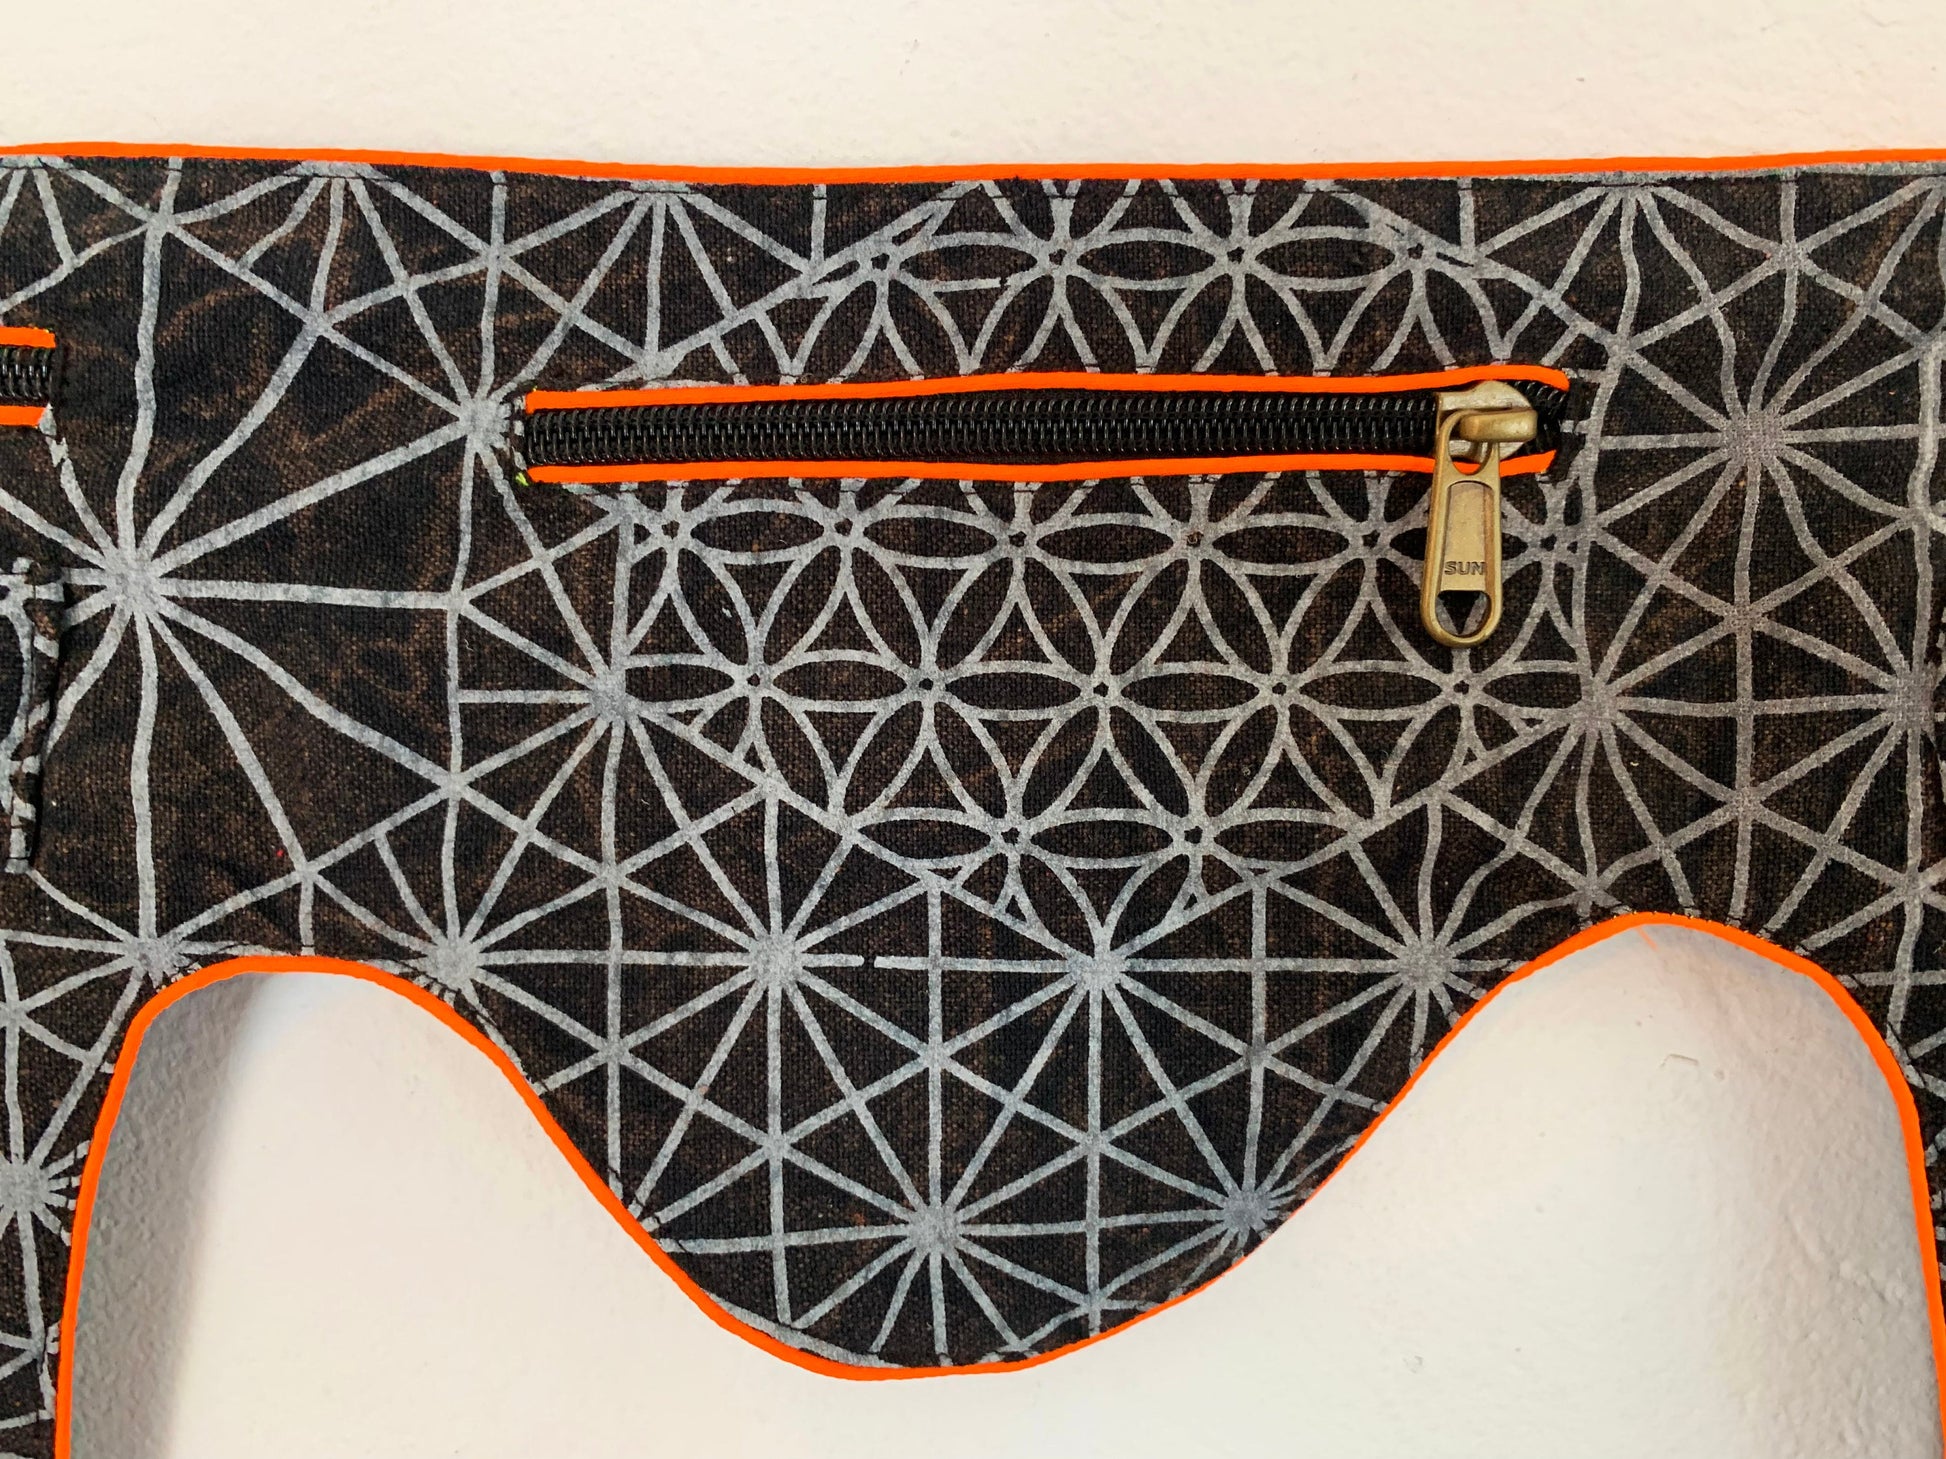 Asanoha Flower of Life Beltbag - 7 pockets, strong ziplocks, size adjustable with hook & loop and clip - UV blacklight active outlines